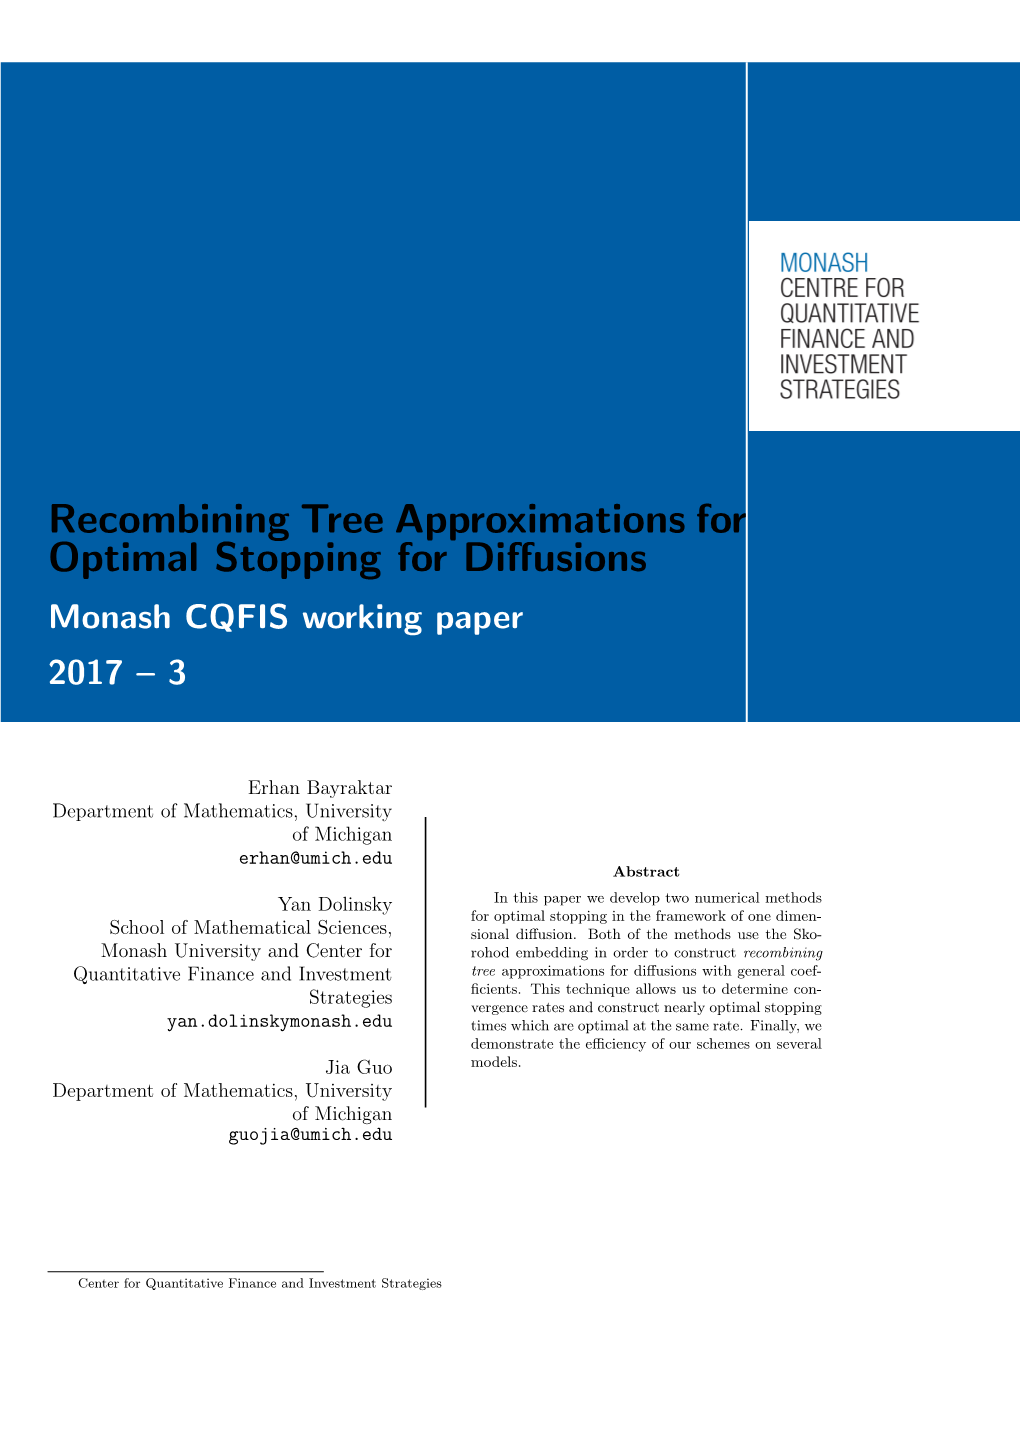 Recombining Tree Approximations for Optimal Stopping for Di↵Usions Monash CQFIS Working Paper 2017 – 3